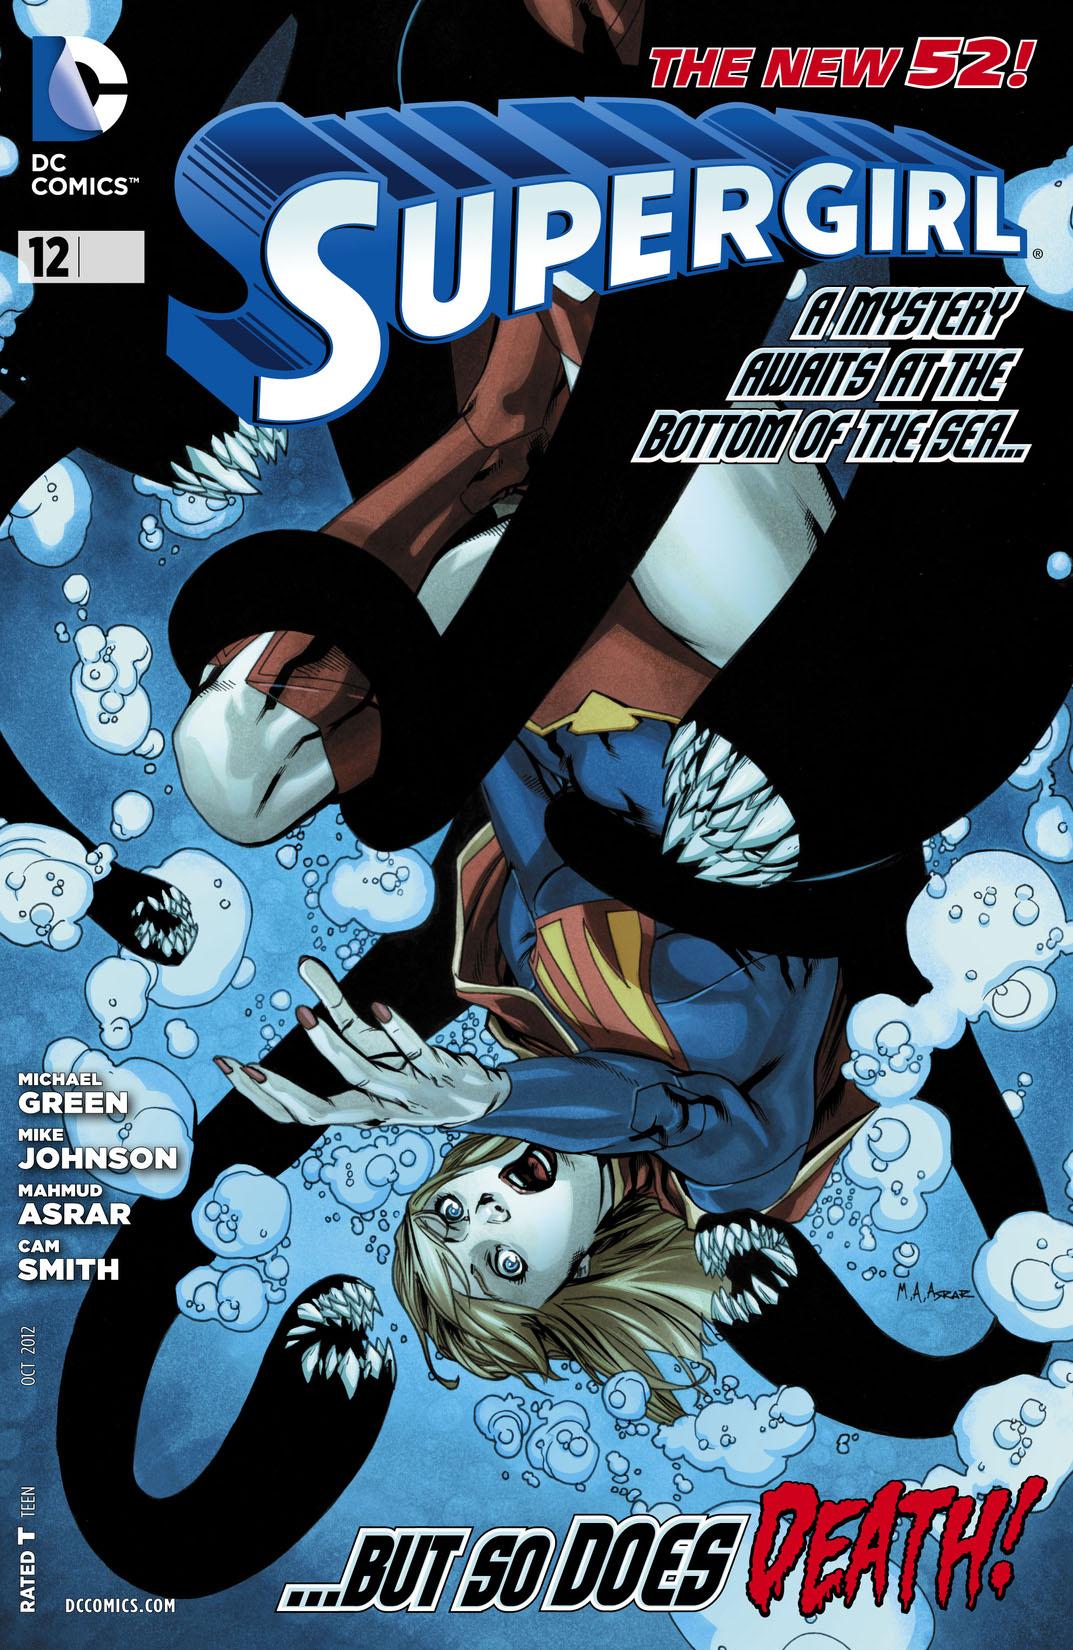 Supergirl (2011-) #12 preview images